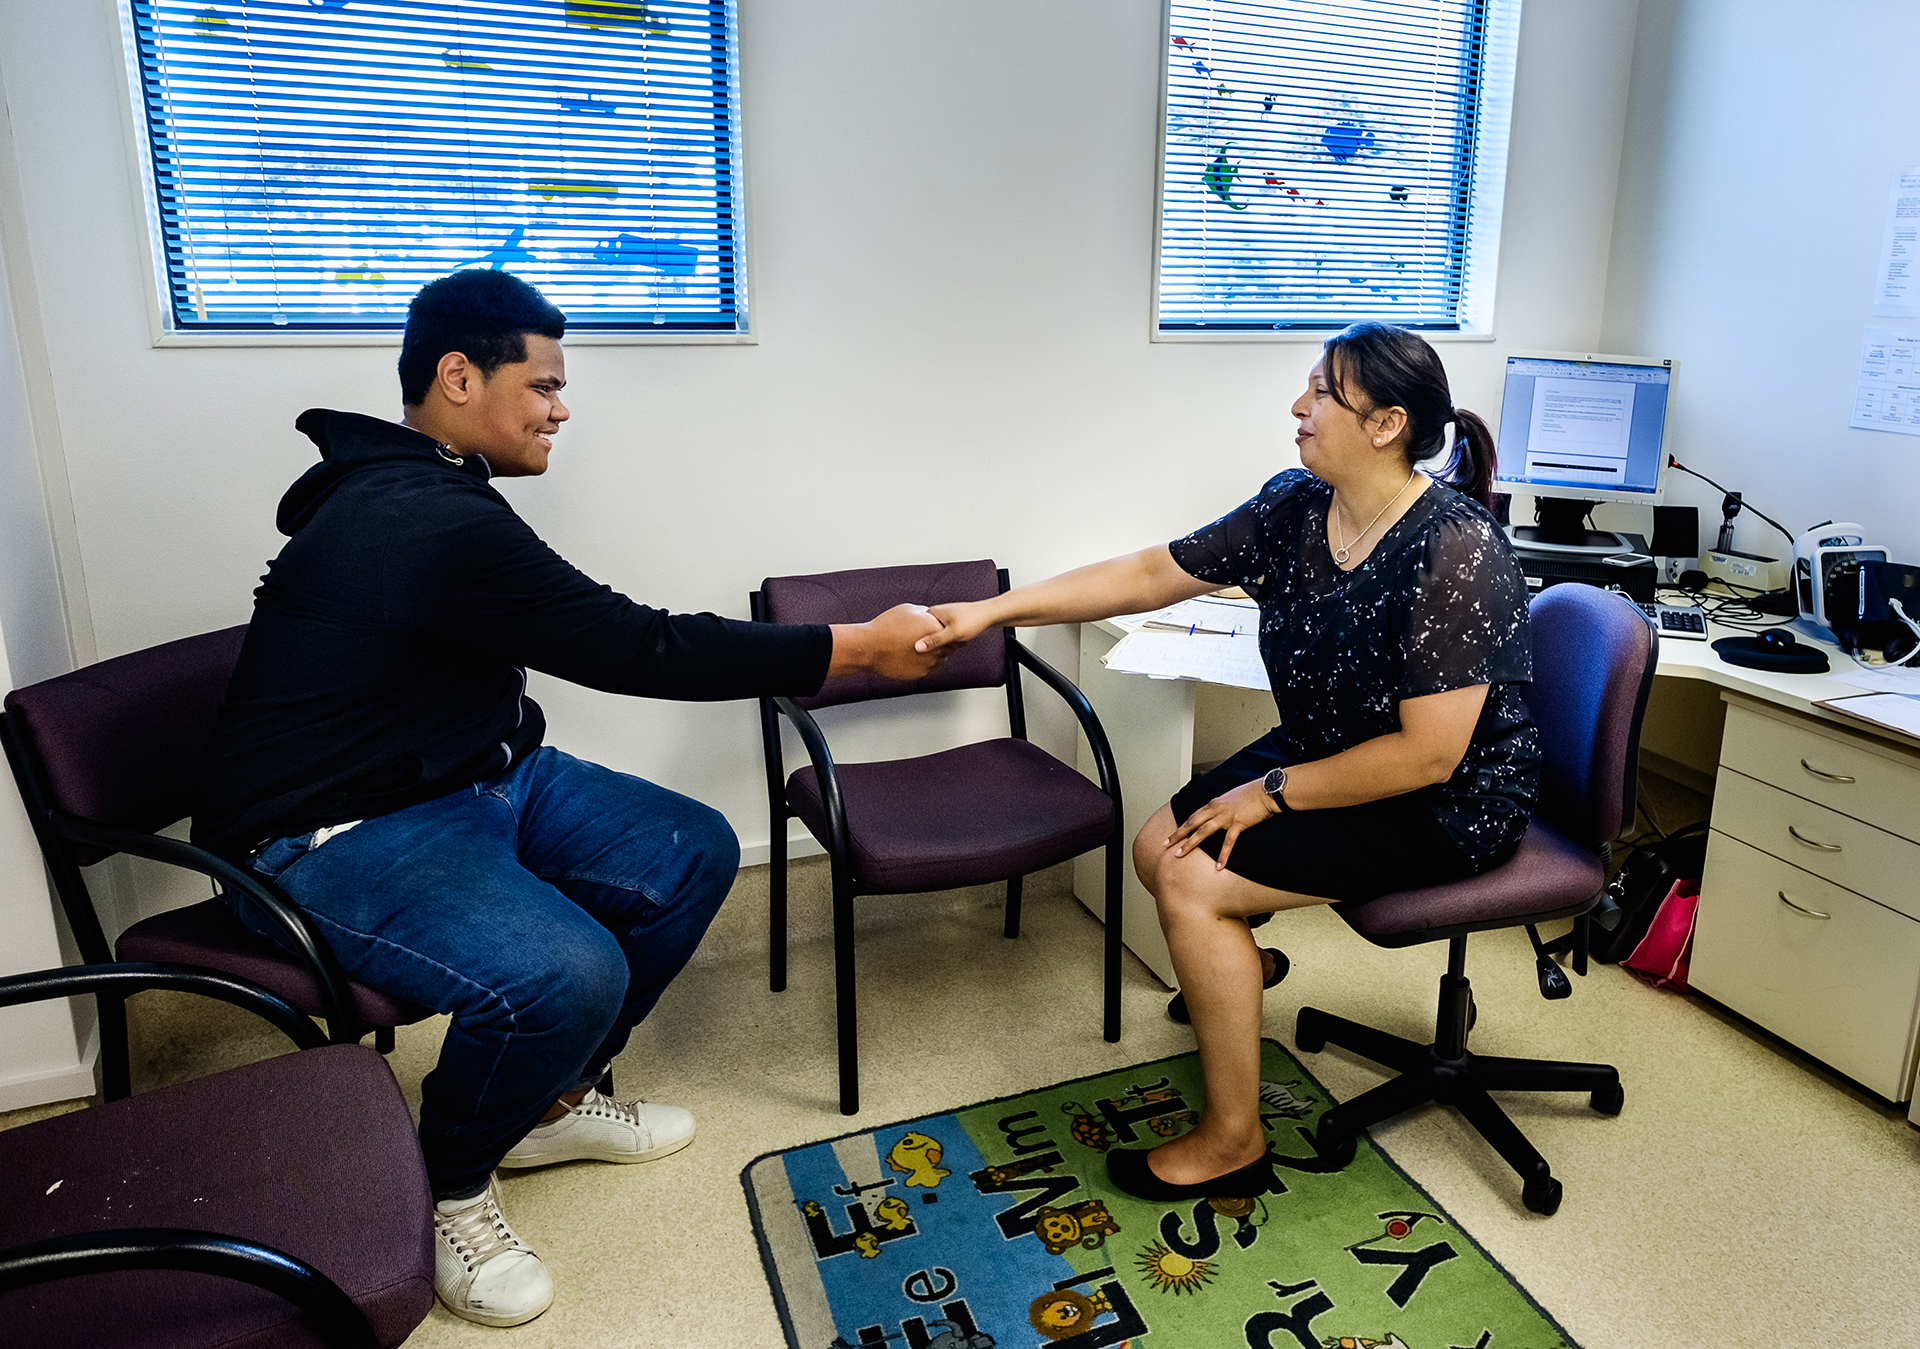 A rheumatic fever patient consults with a dentist at the Manukau Superclinic in South Auckland.